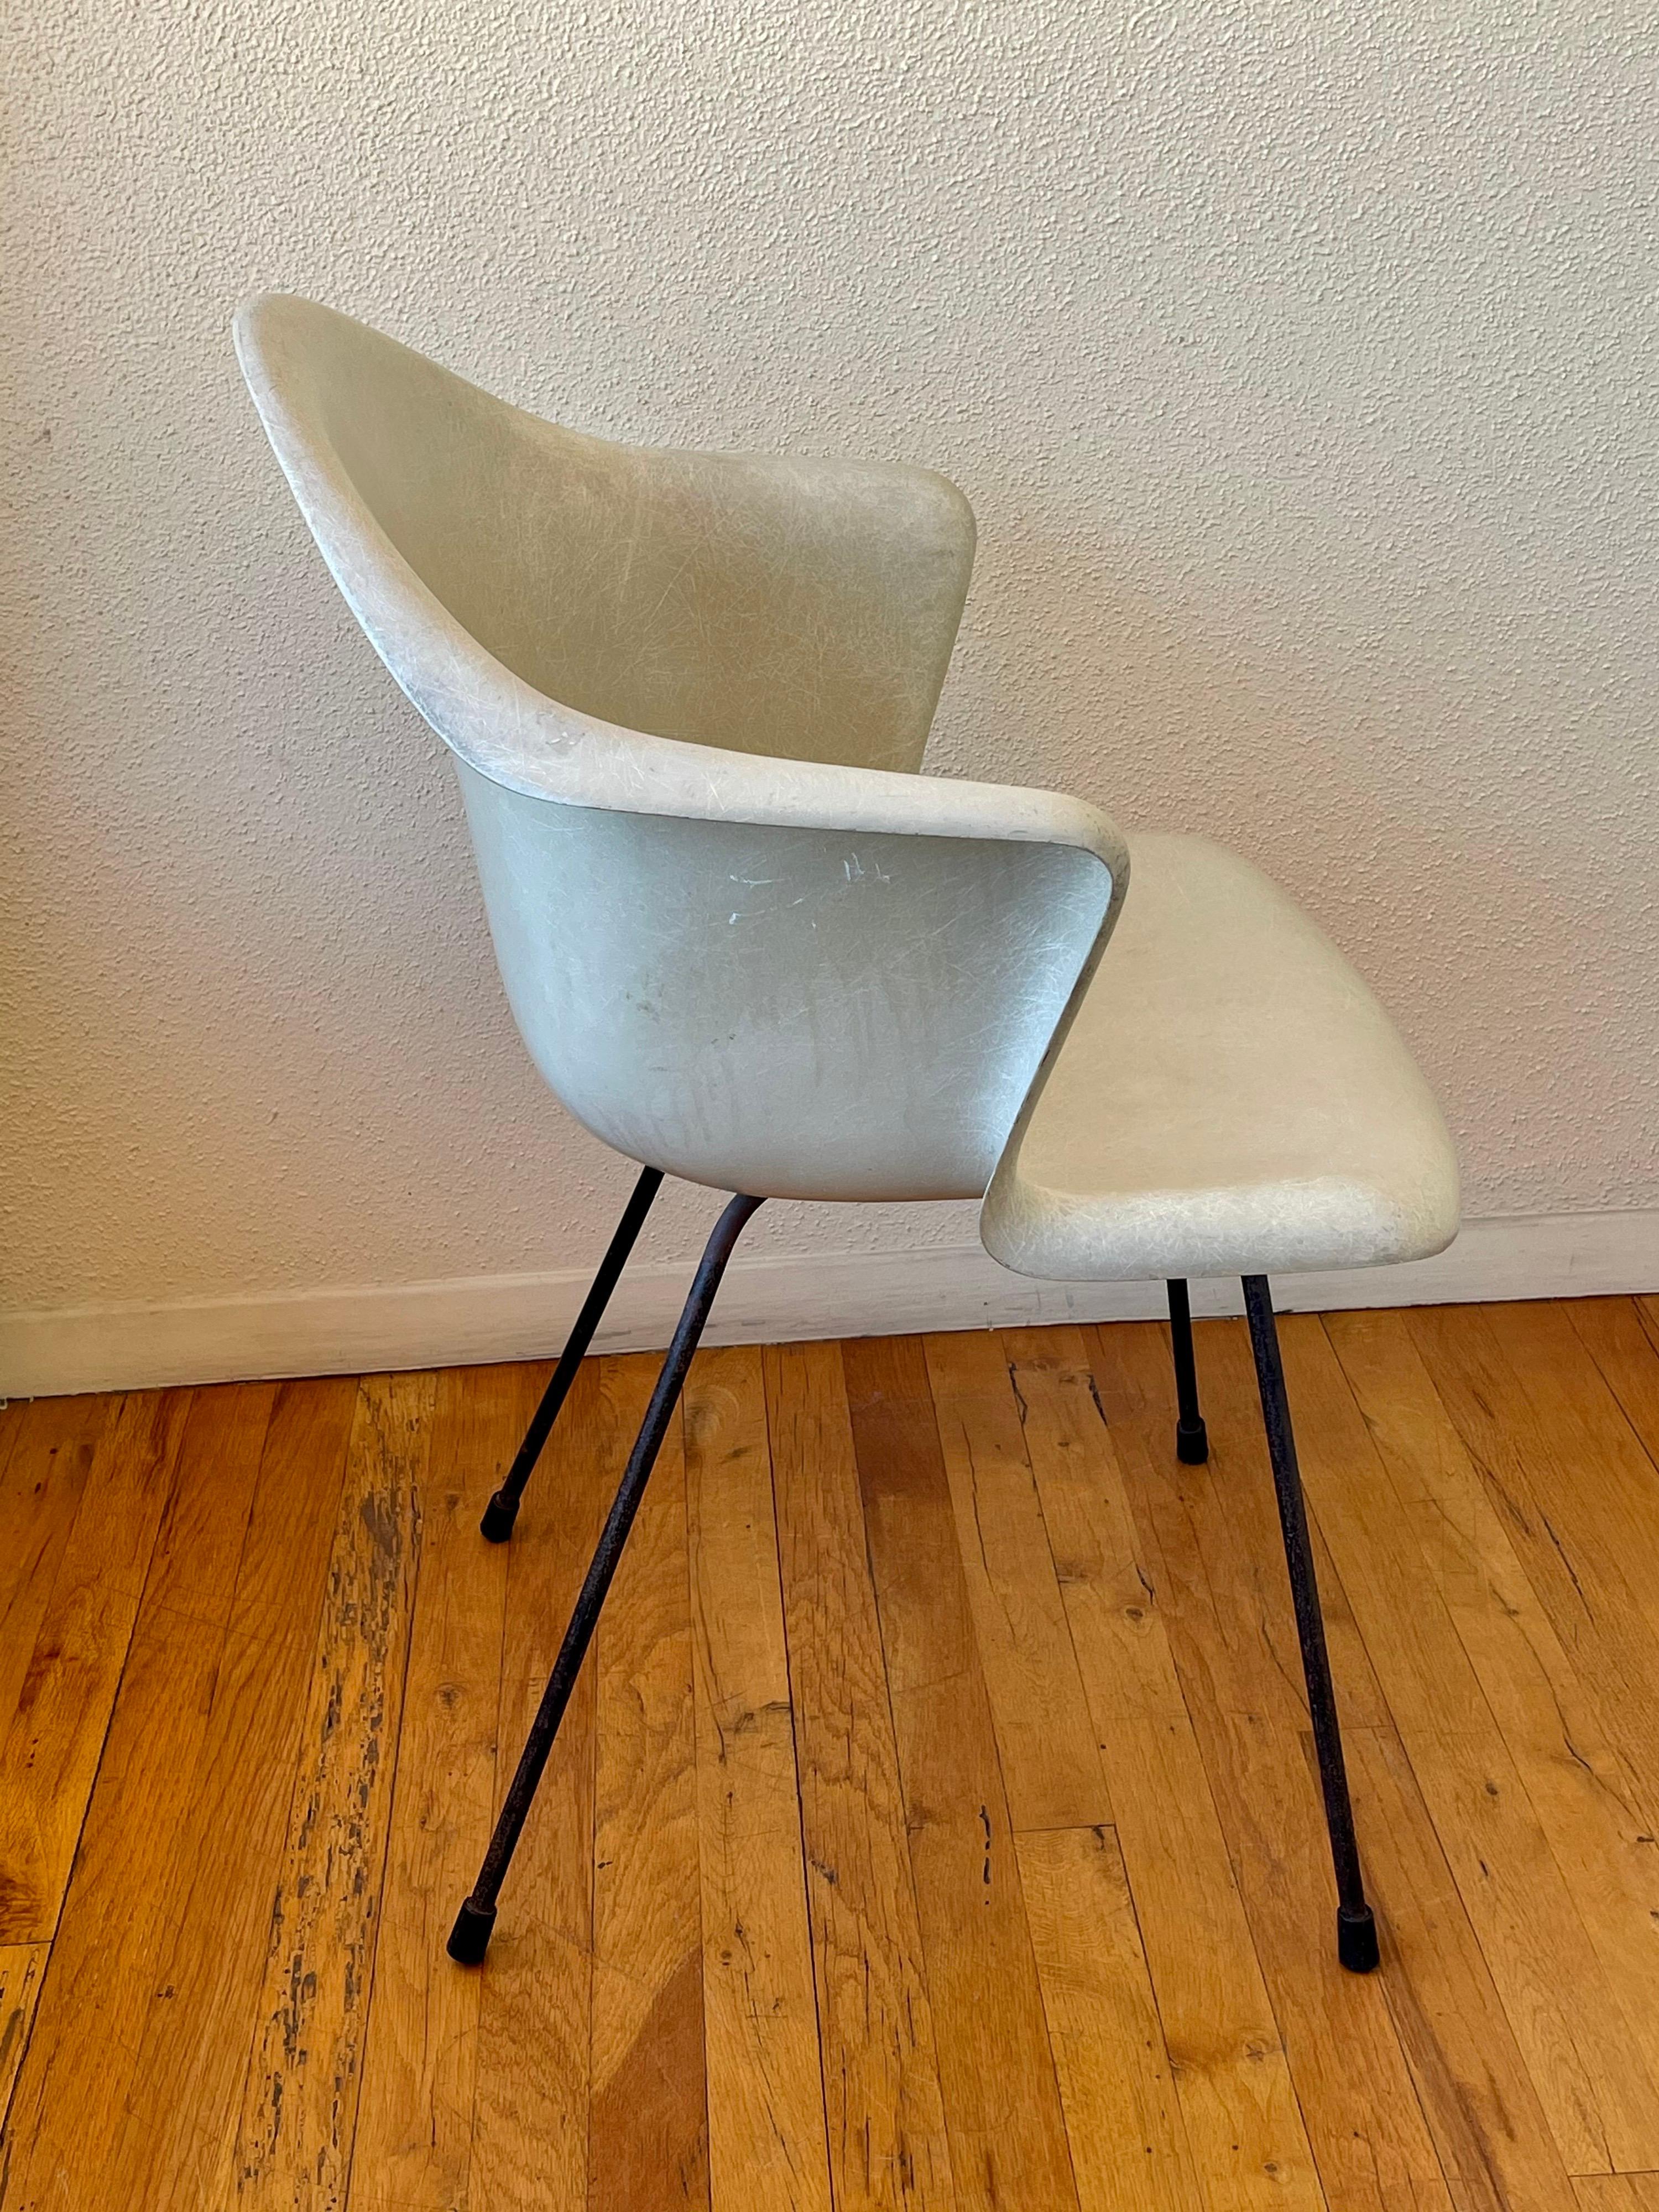 American Rare Fiberglass Armchair Designed by Lawrence Peabody with Iron Base